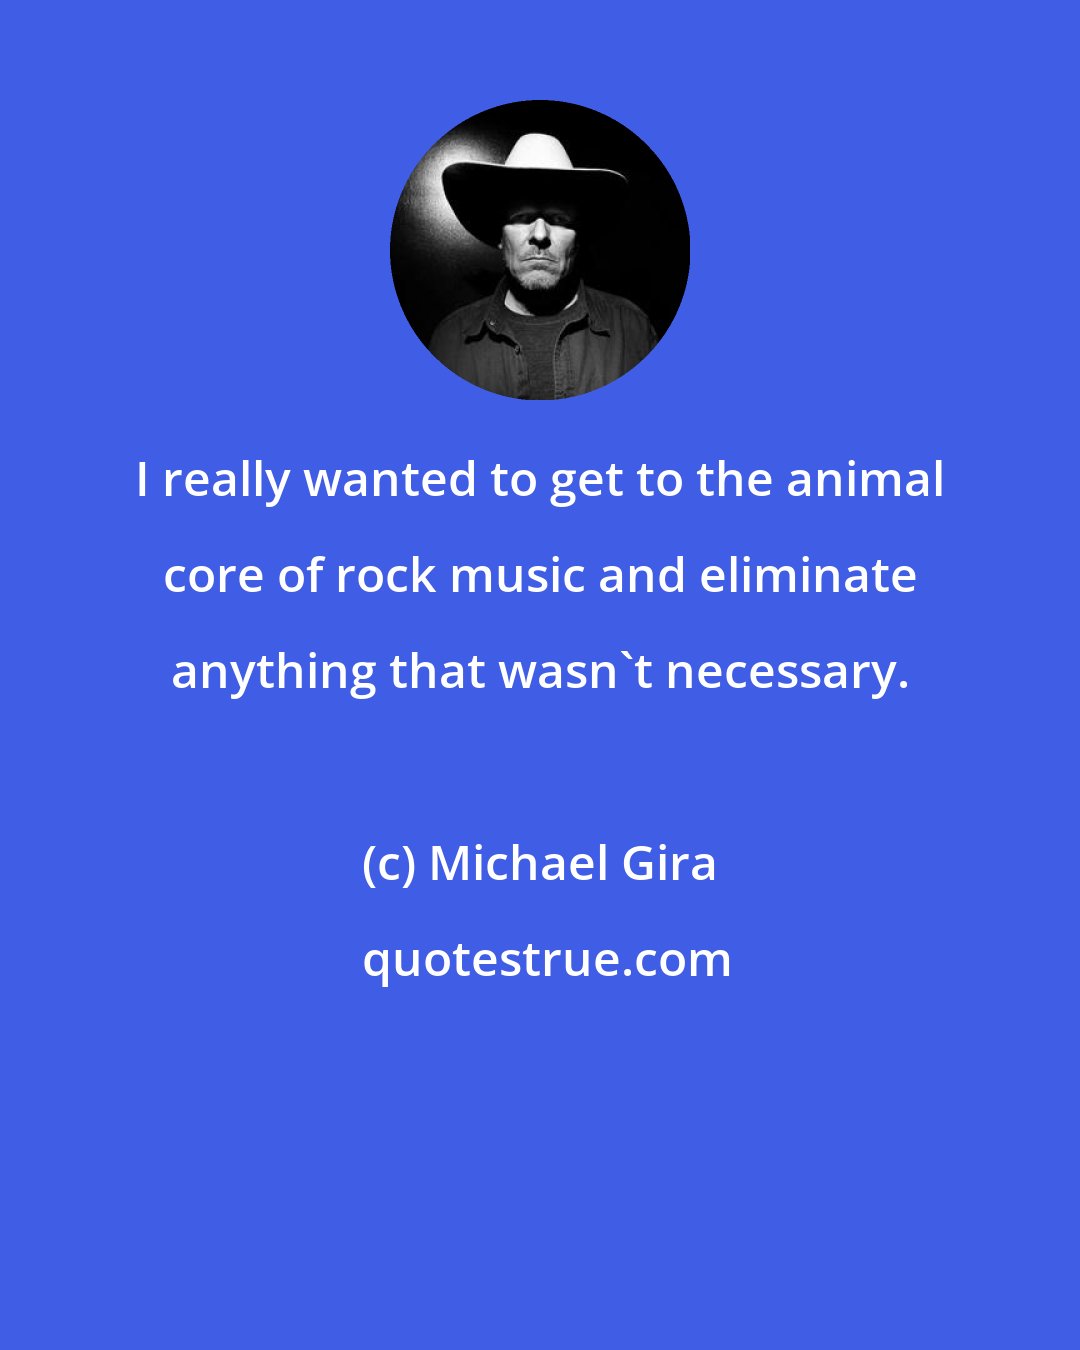 Michael Gira: I really wanted to get to the animal core of rock music and eliminate anything that wasn't necessary.